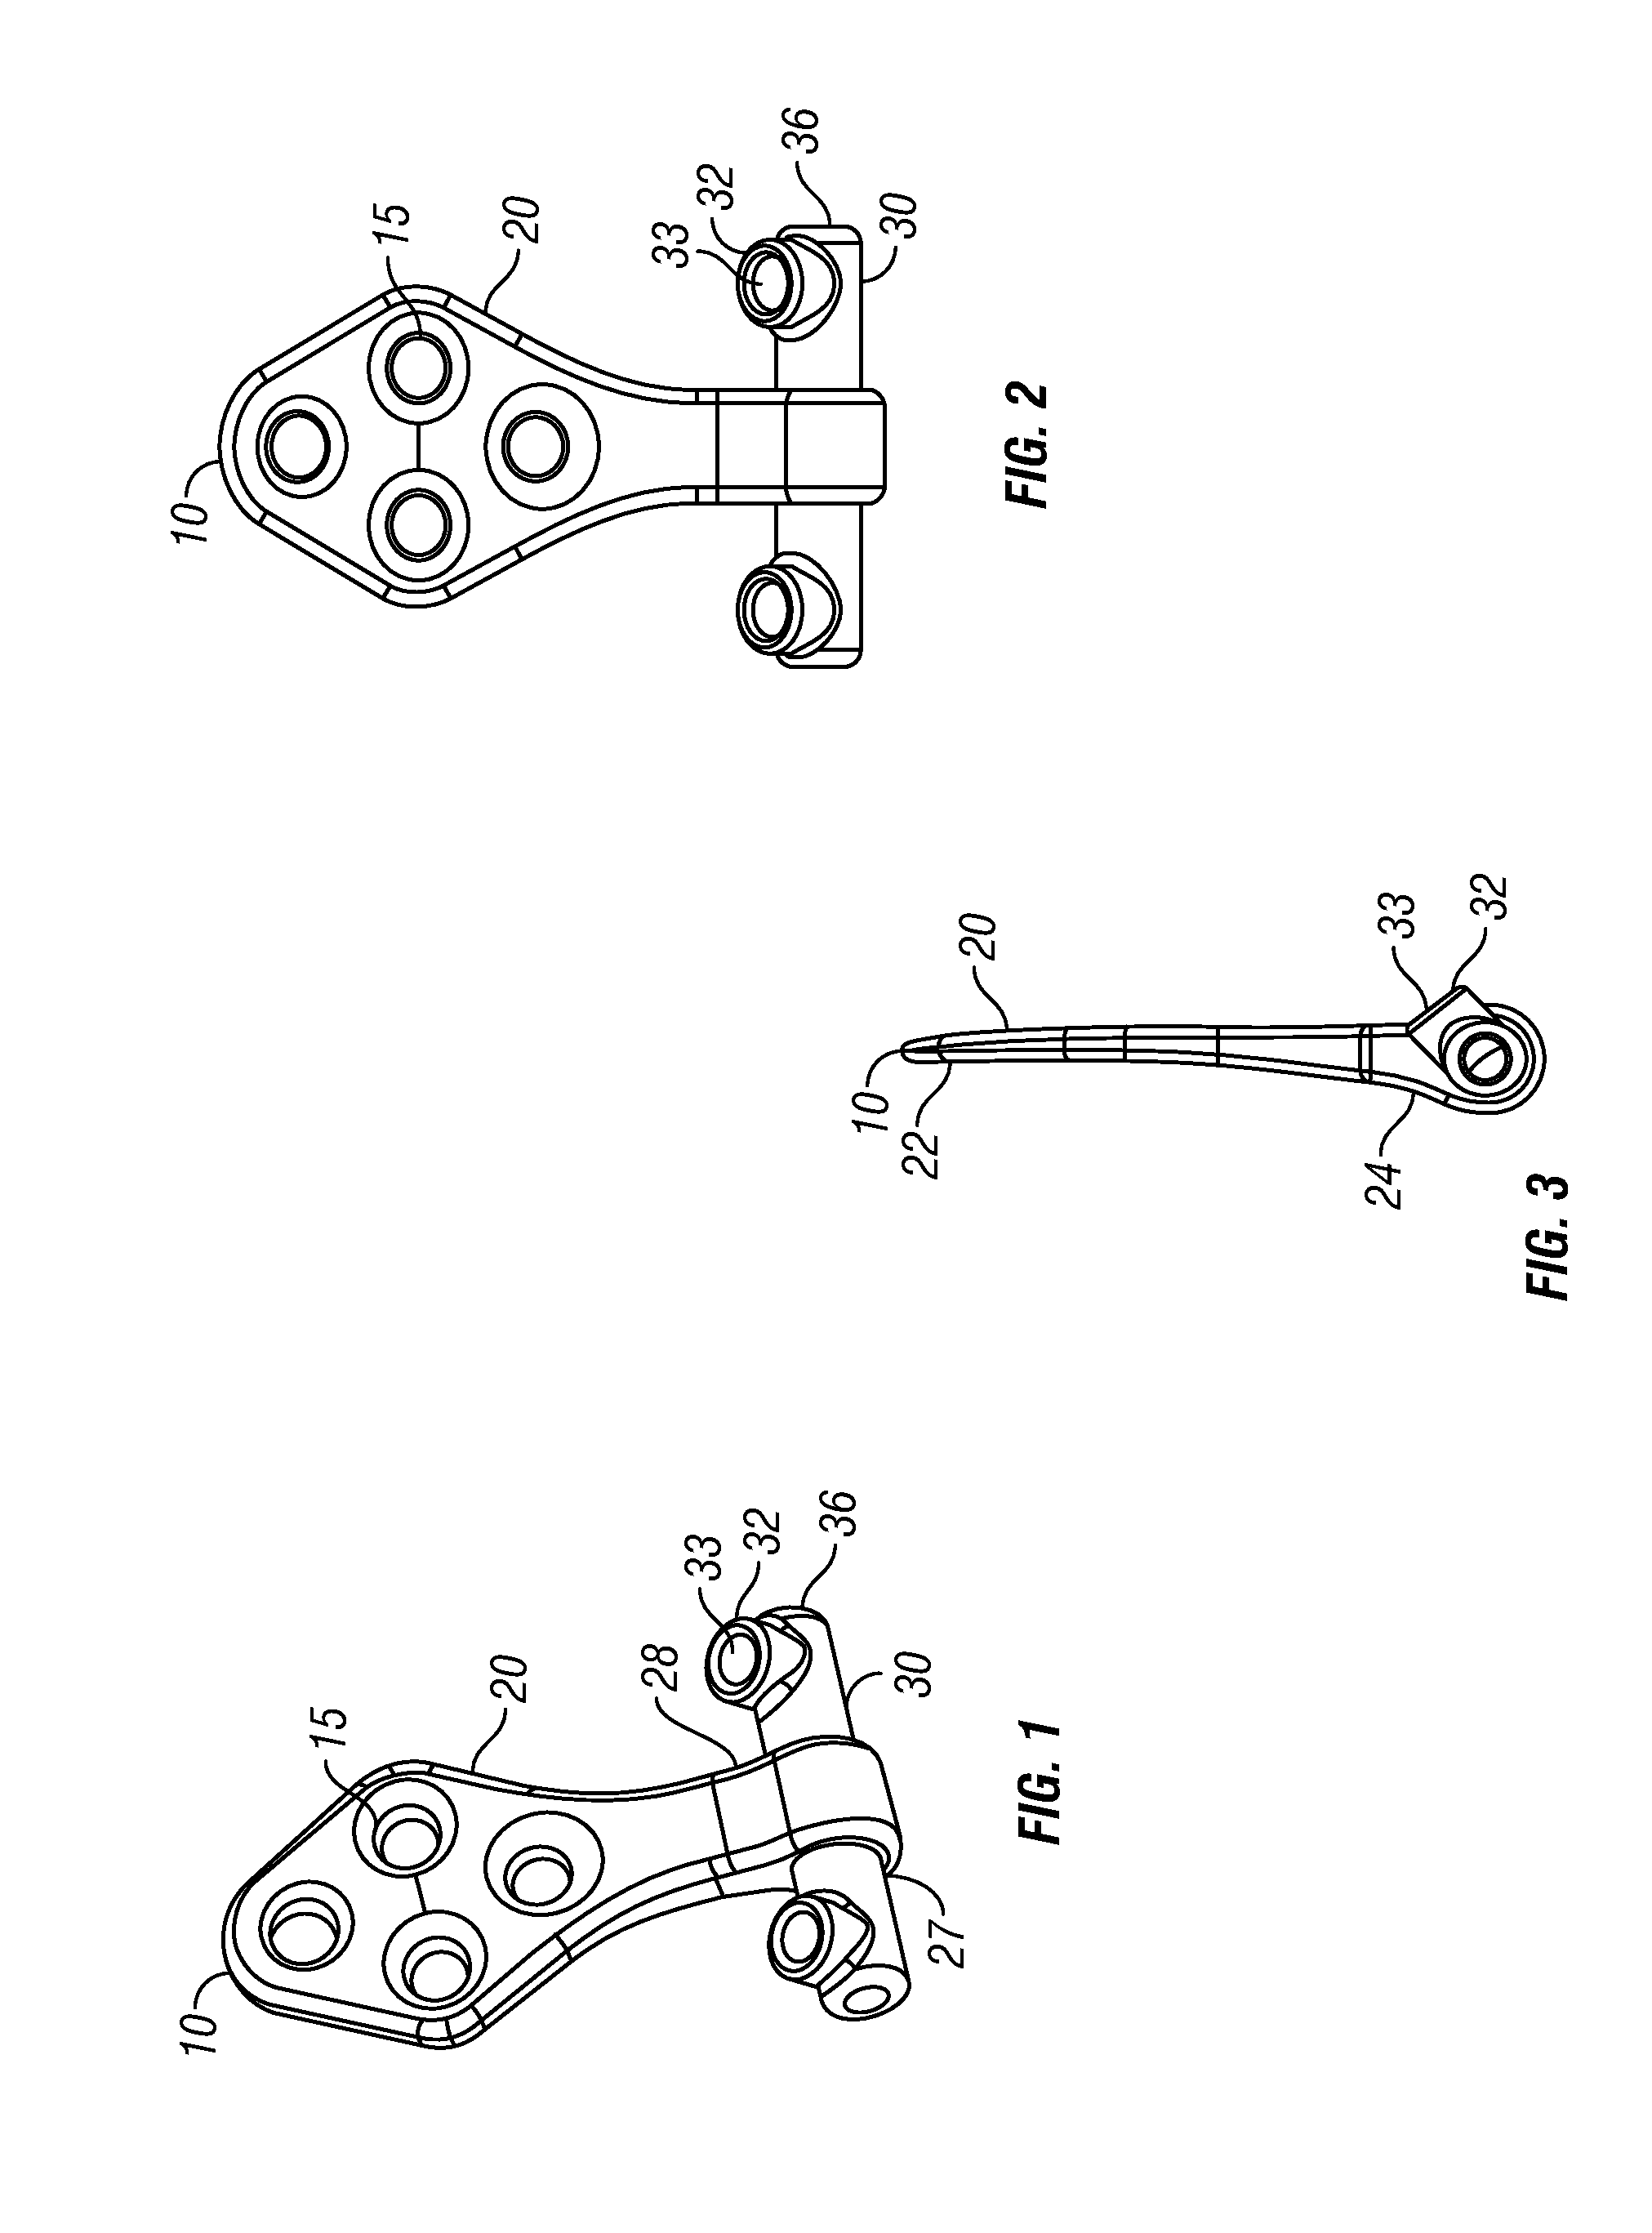 Occipital plate systems